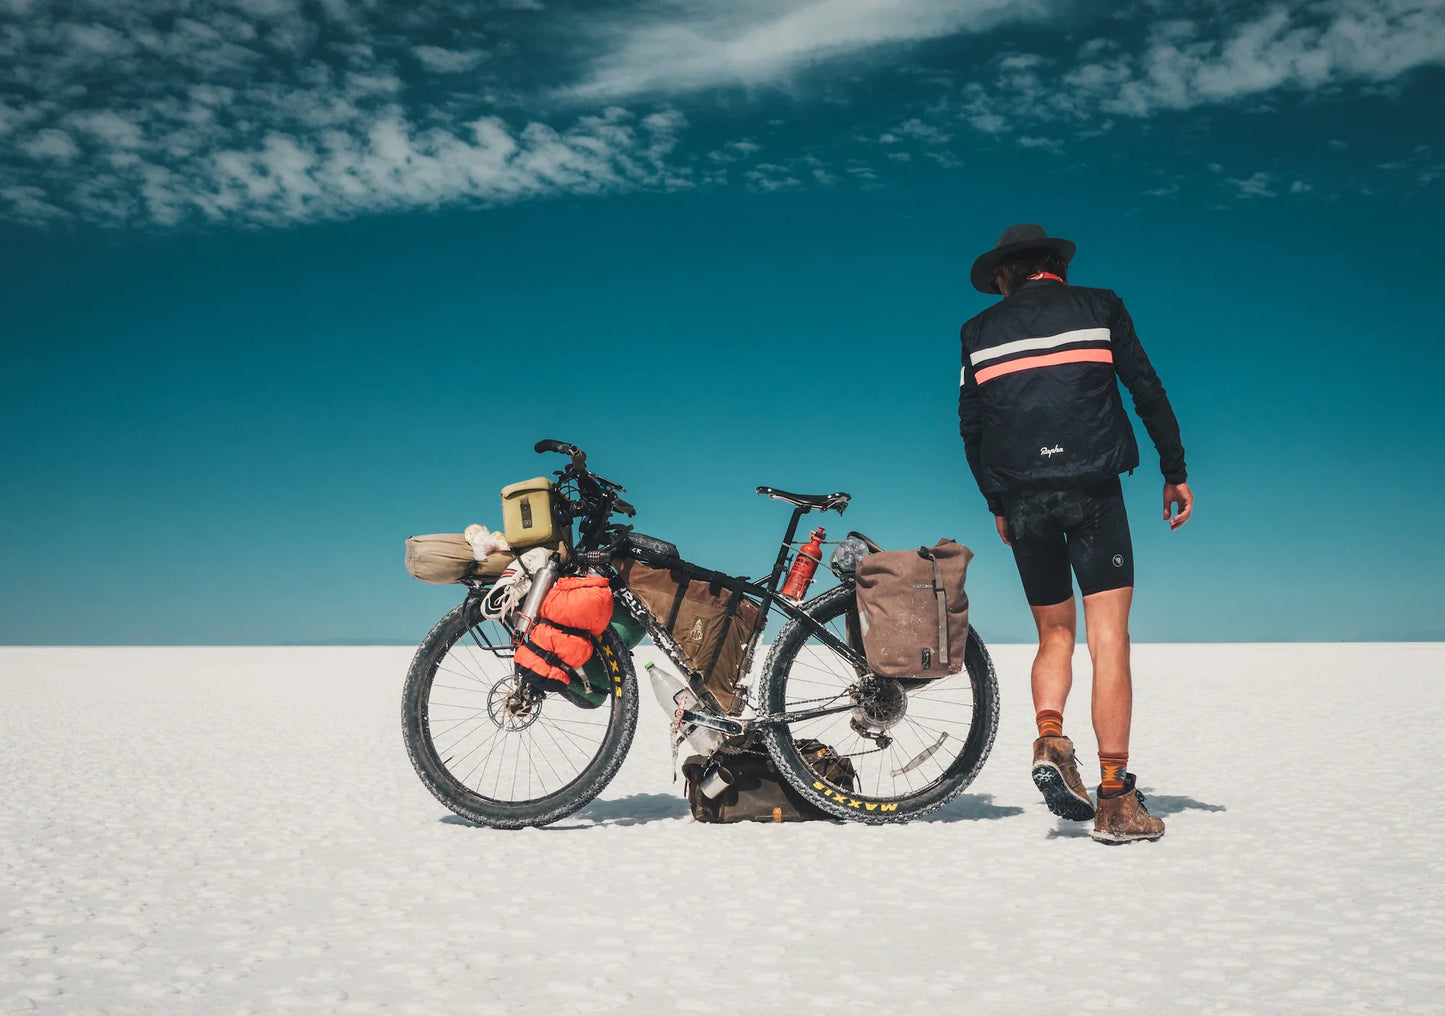 Two Years On A Bike - From Vancouver to Patagonia | Gestalten